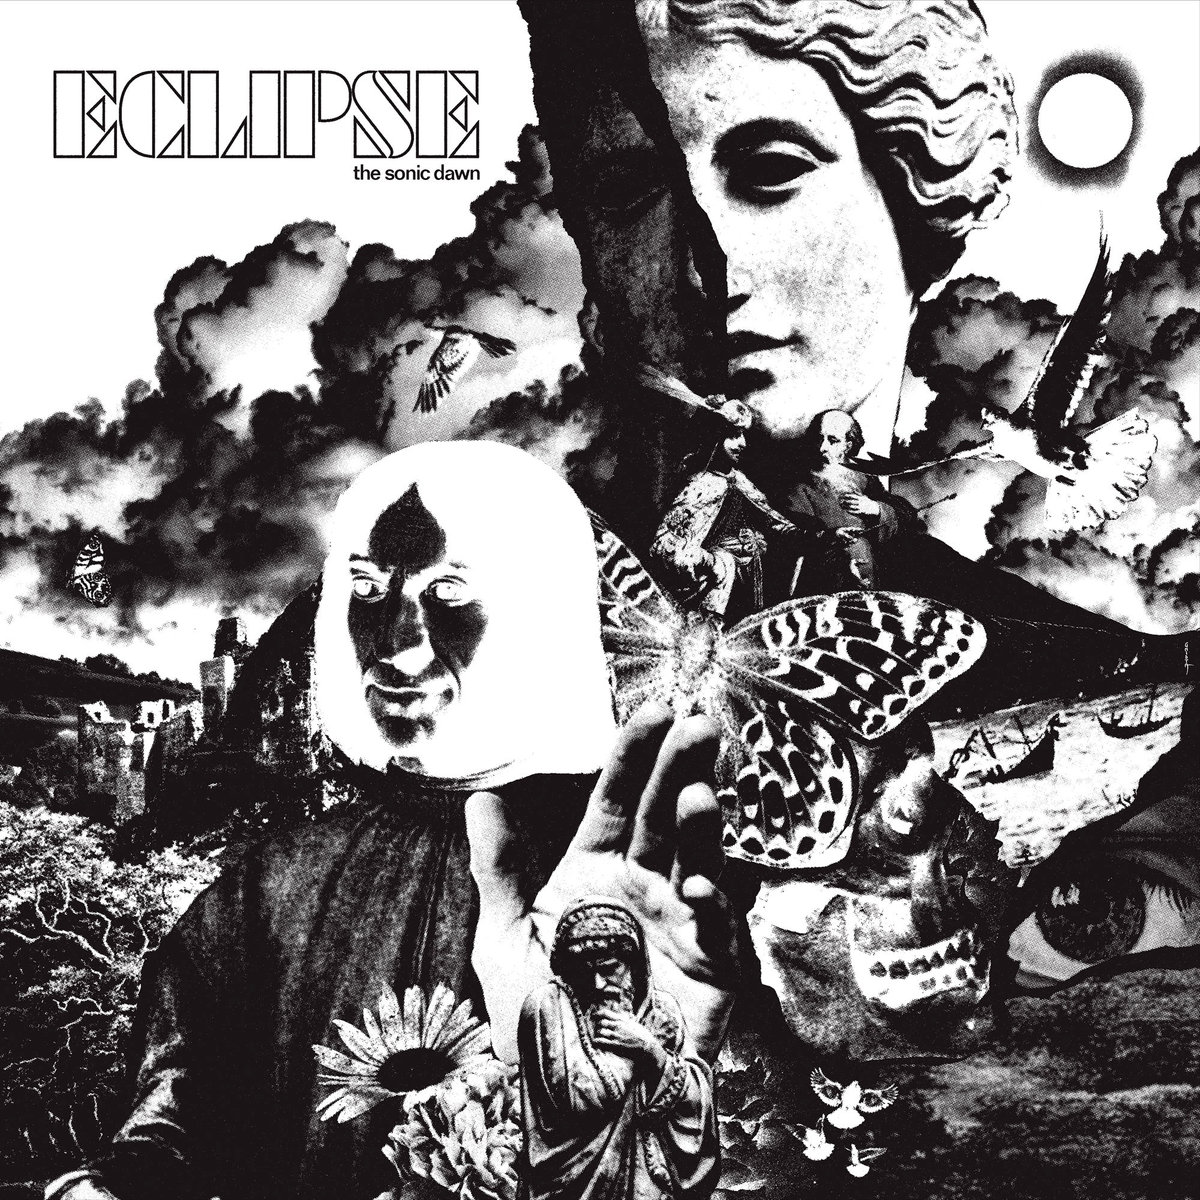 Eclipse Album Cover by Eclipse